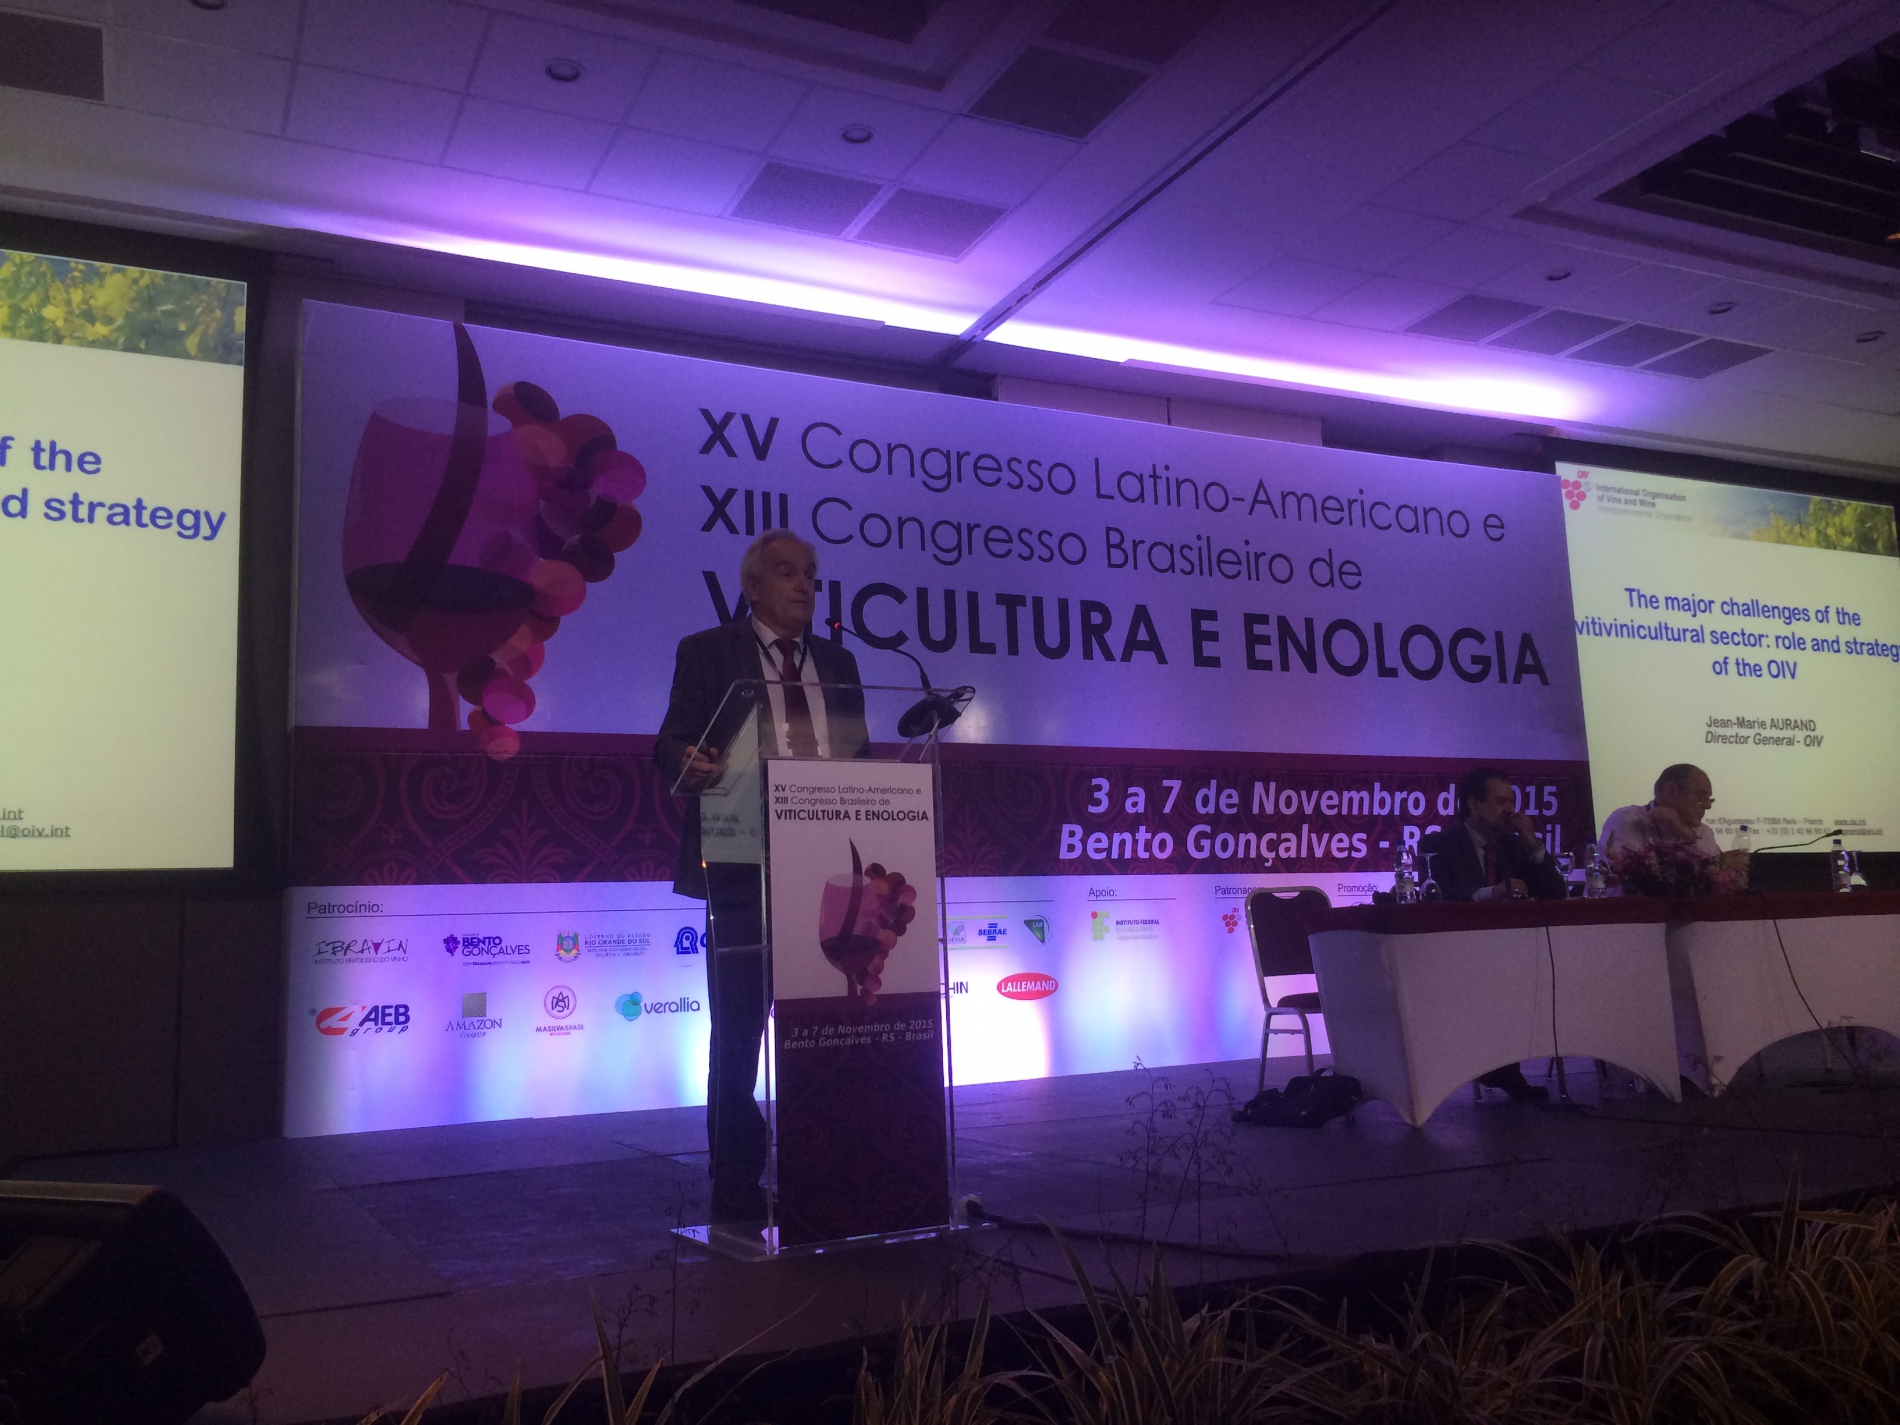 Brazil hosts the 15th Latin American Congress of Viticulture and Oenology